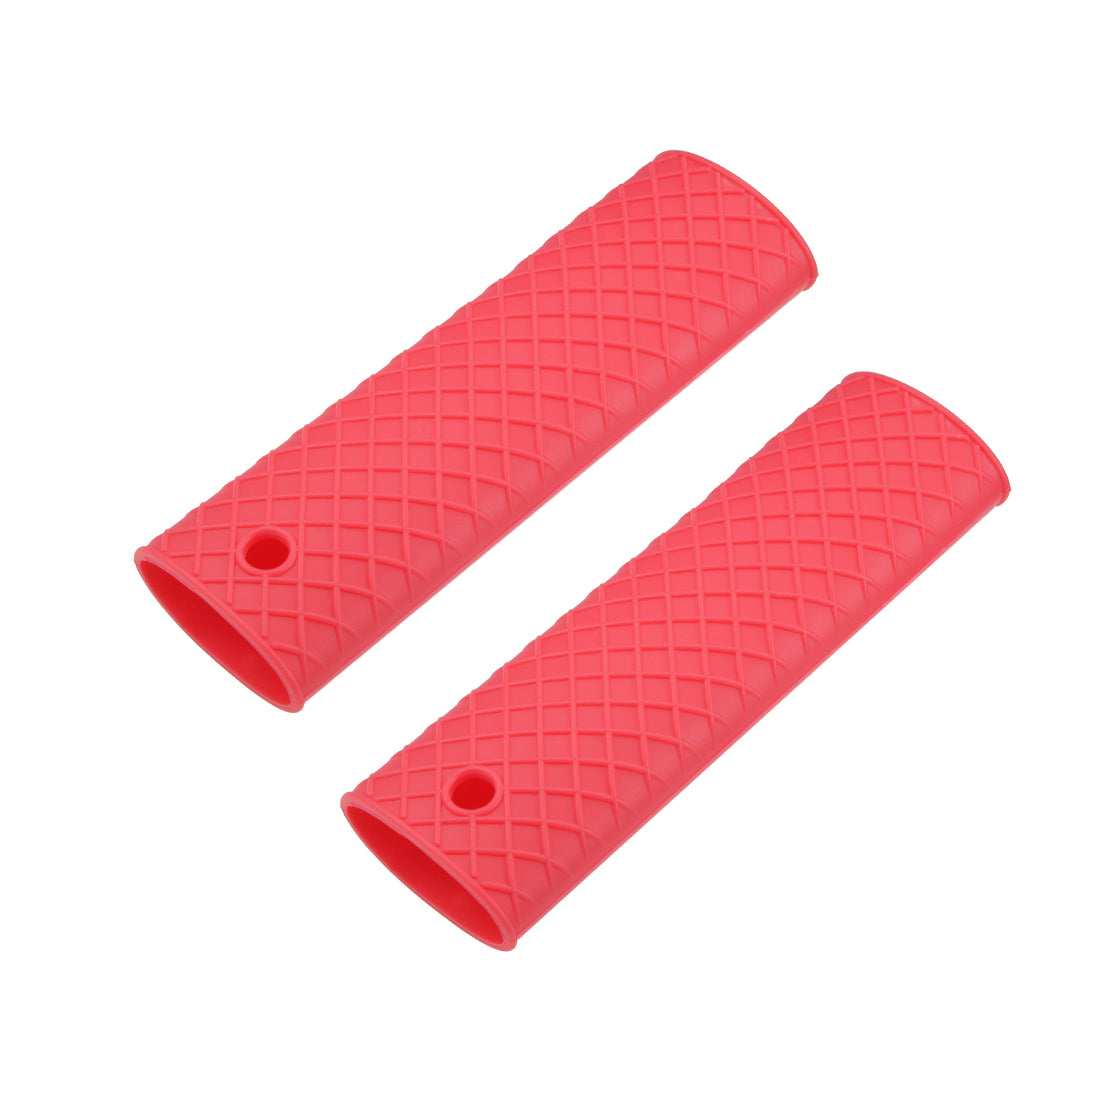 uxcell Uxcell Silicone Hot Handle Holder Sleeve, Pan Pot Handle Cover Red 6.1-inch Long 2Pcs